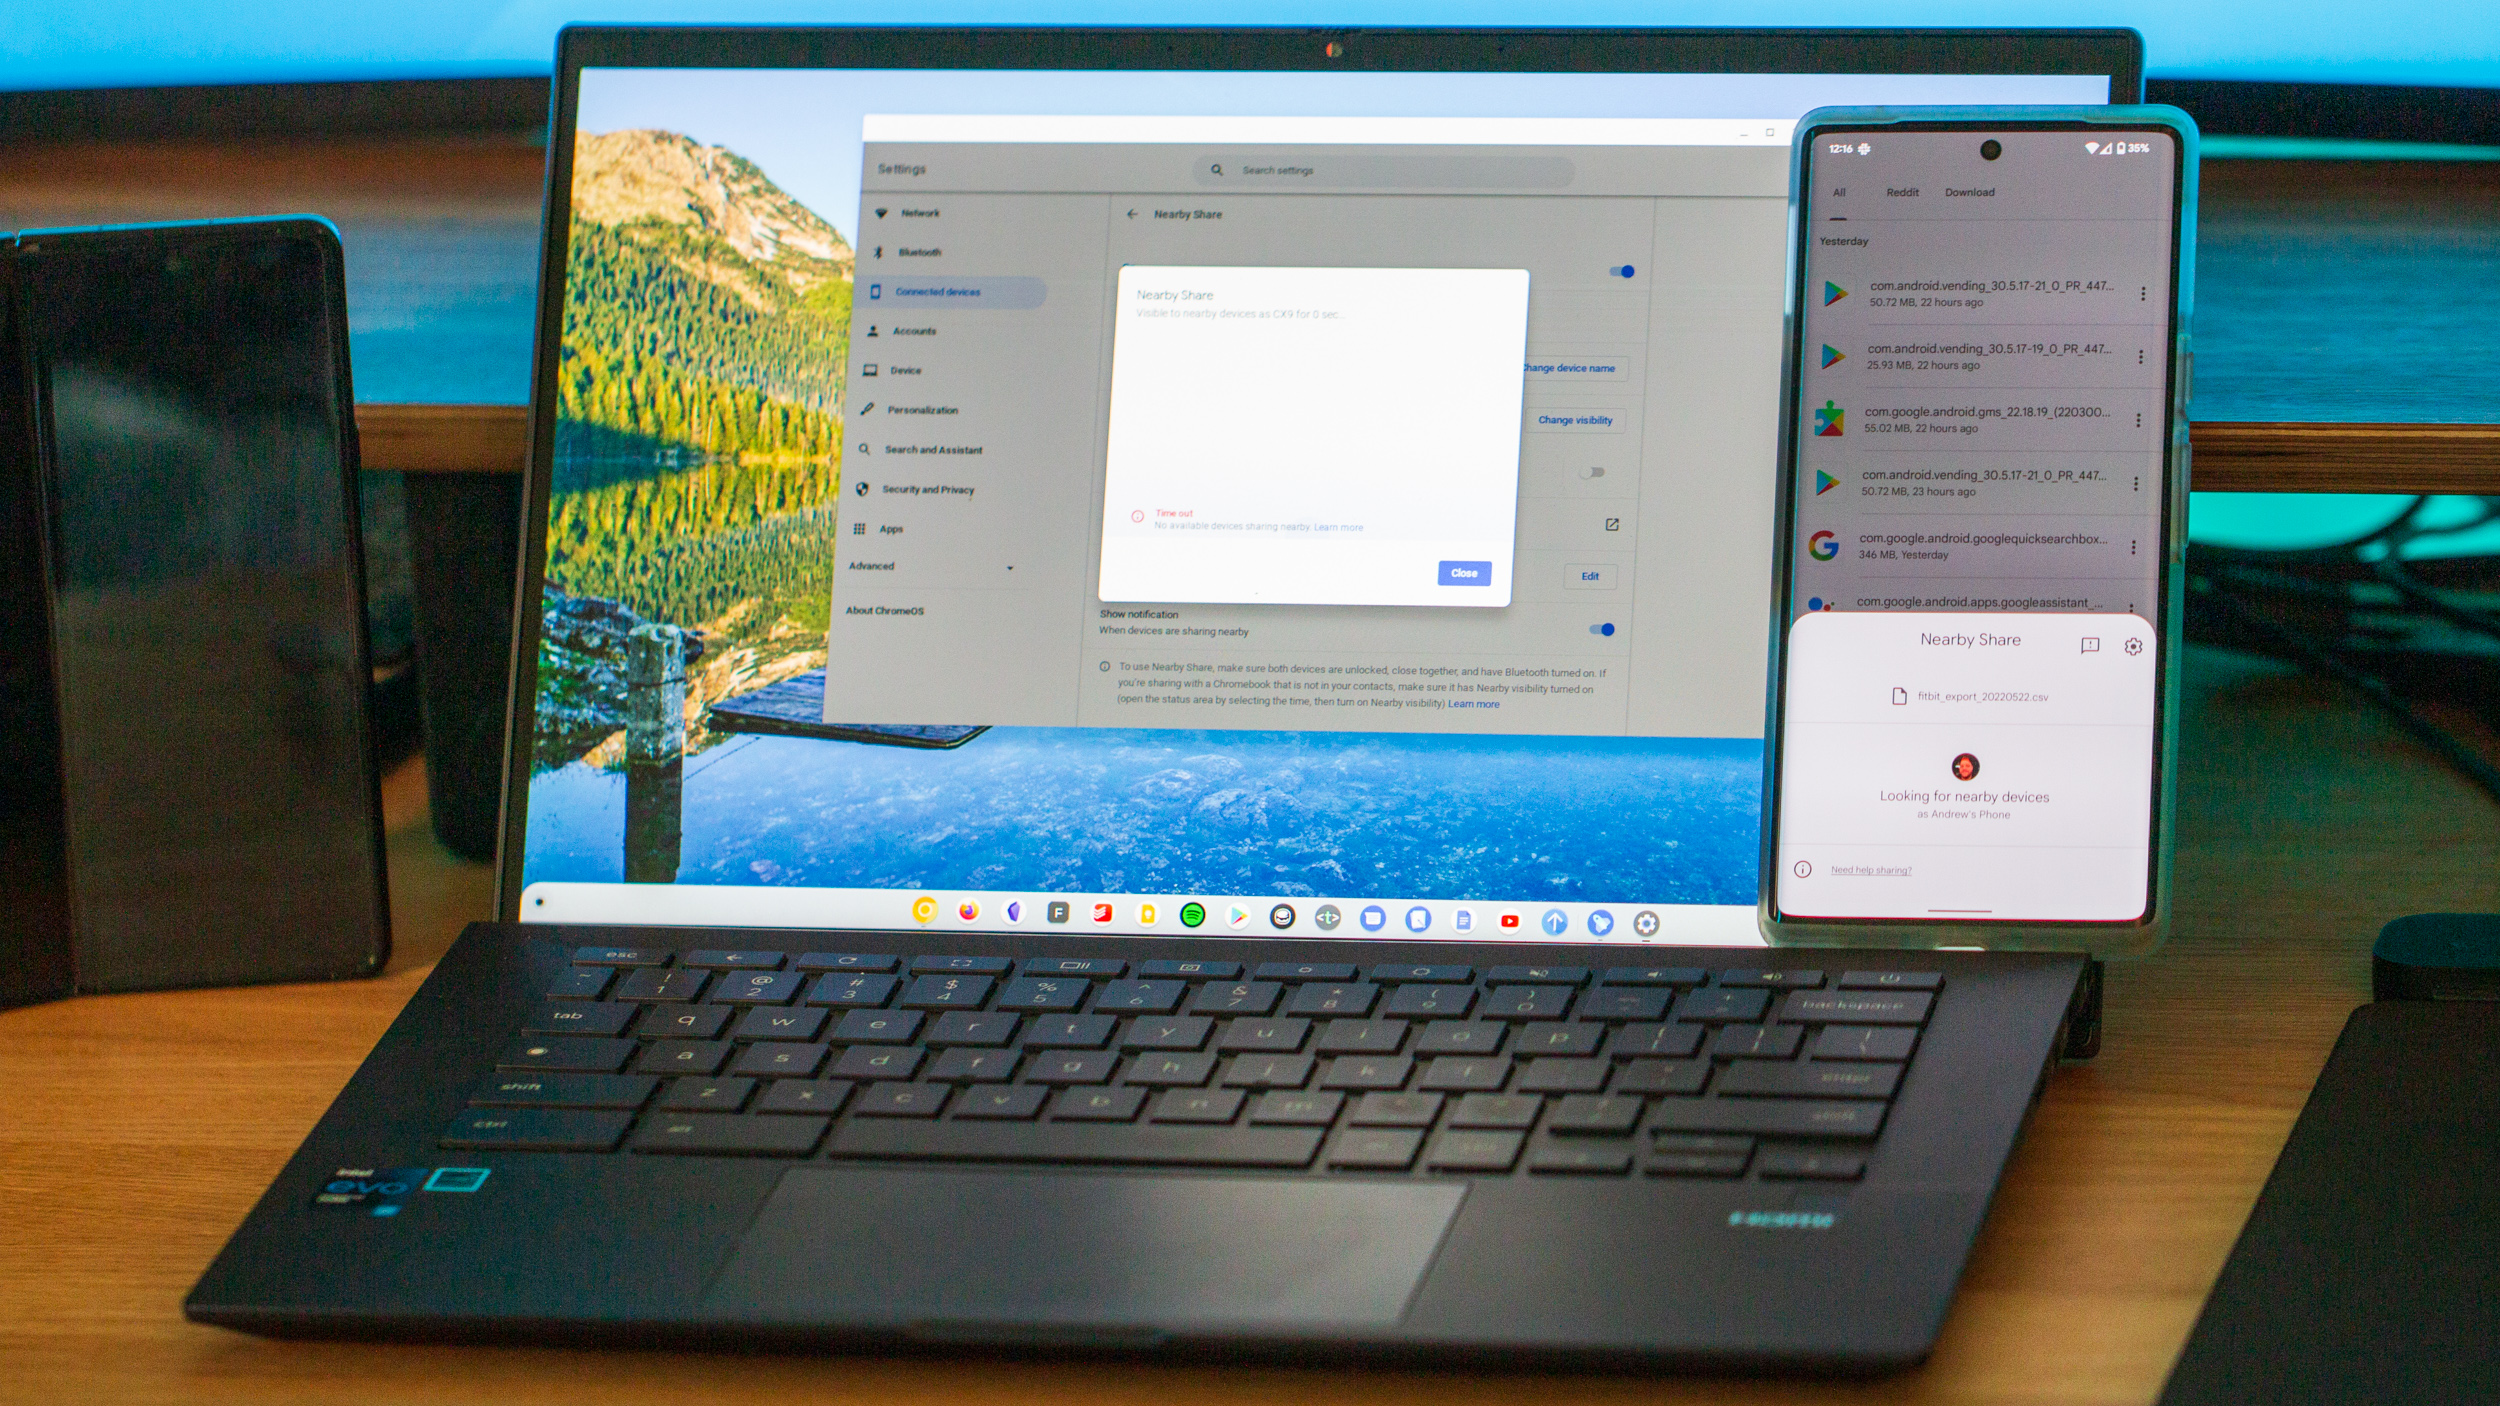 How to send files from your phone to your Chromebook using Nearby Sharing